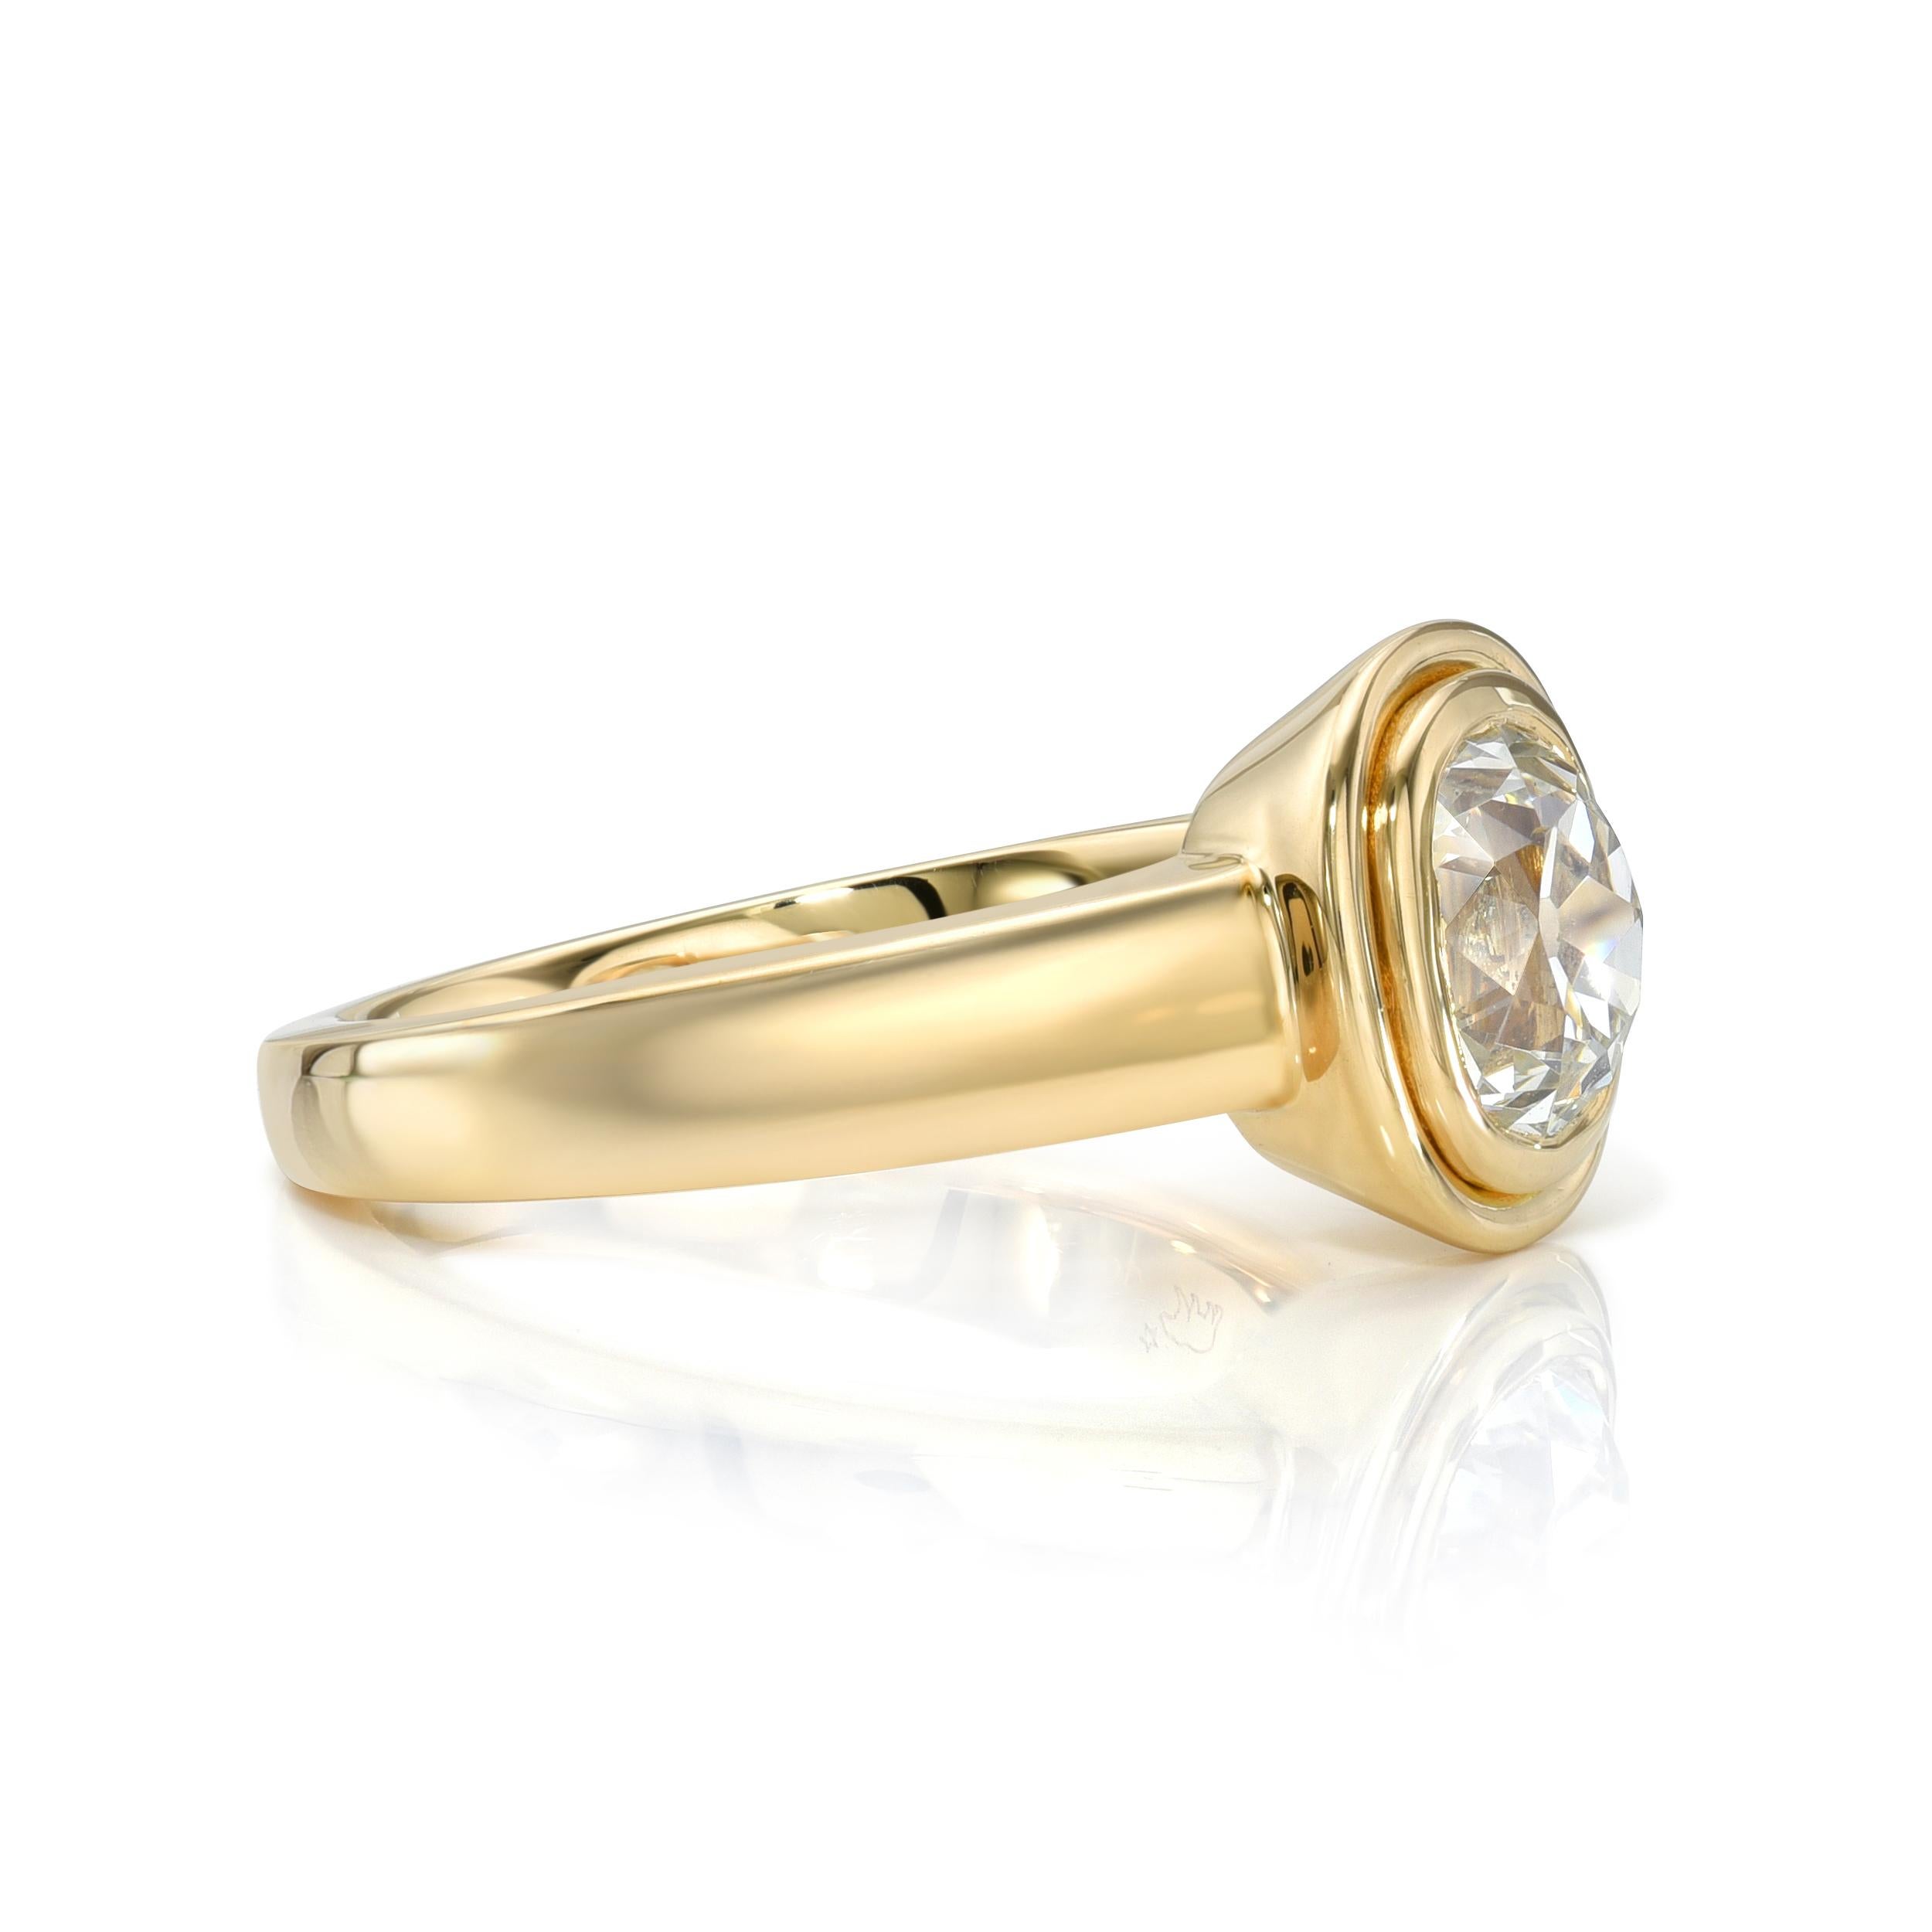 1.74ct L/SI1 GIA certified antique cushion cut diamond bezel set in a handcrafted 18K yellow gold mounting.